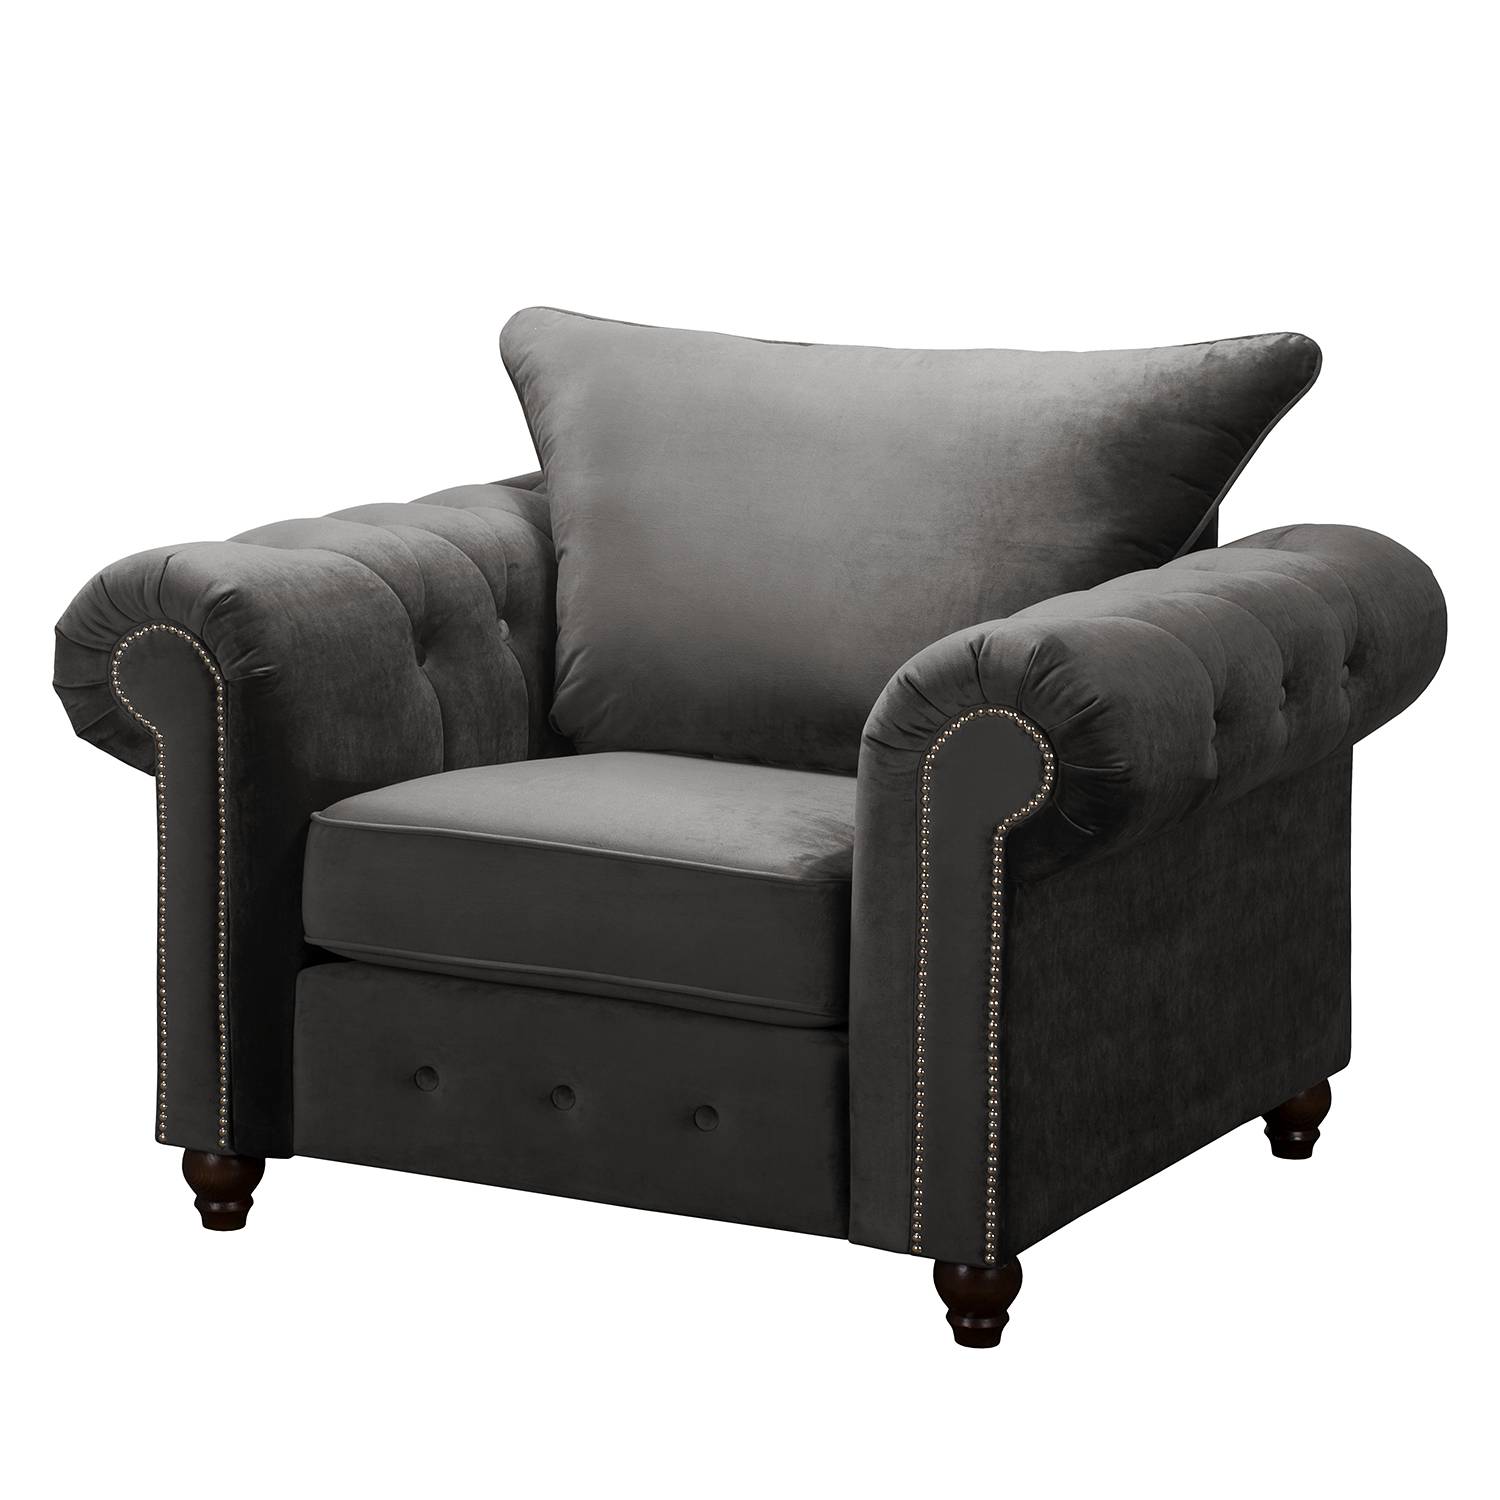 Image of Fauteuil Solita 000000001000135631